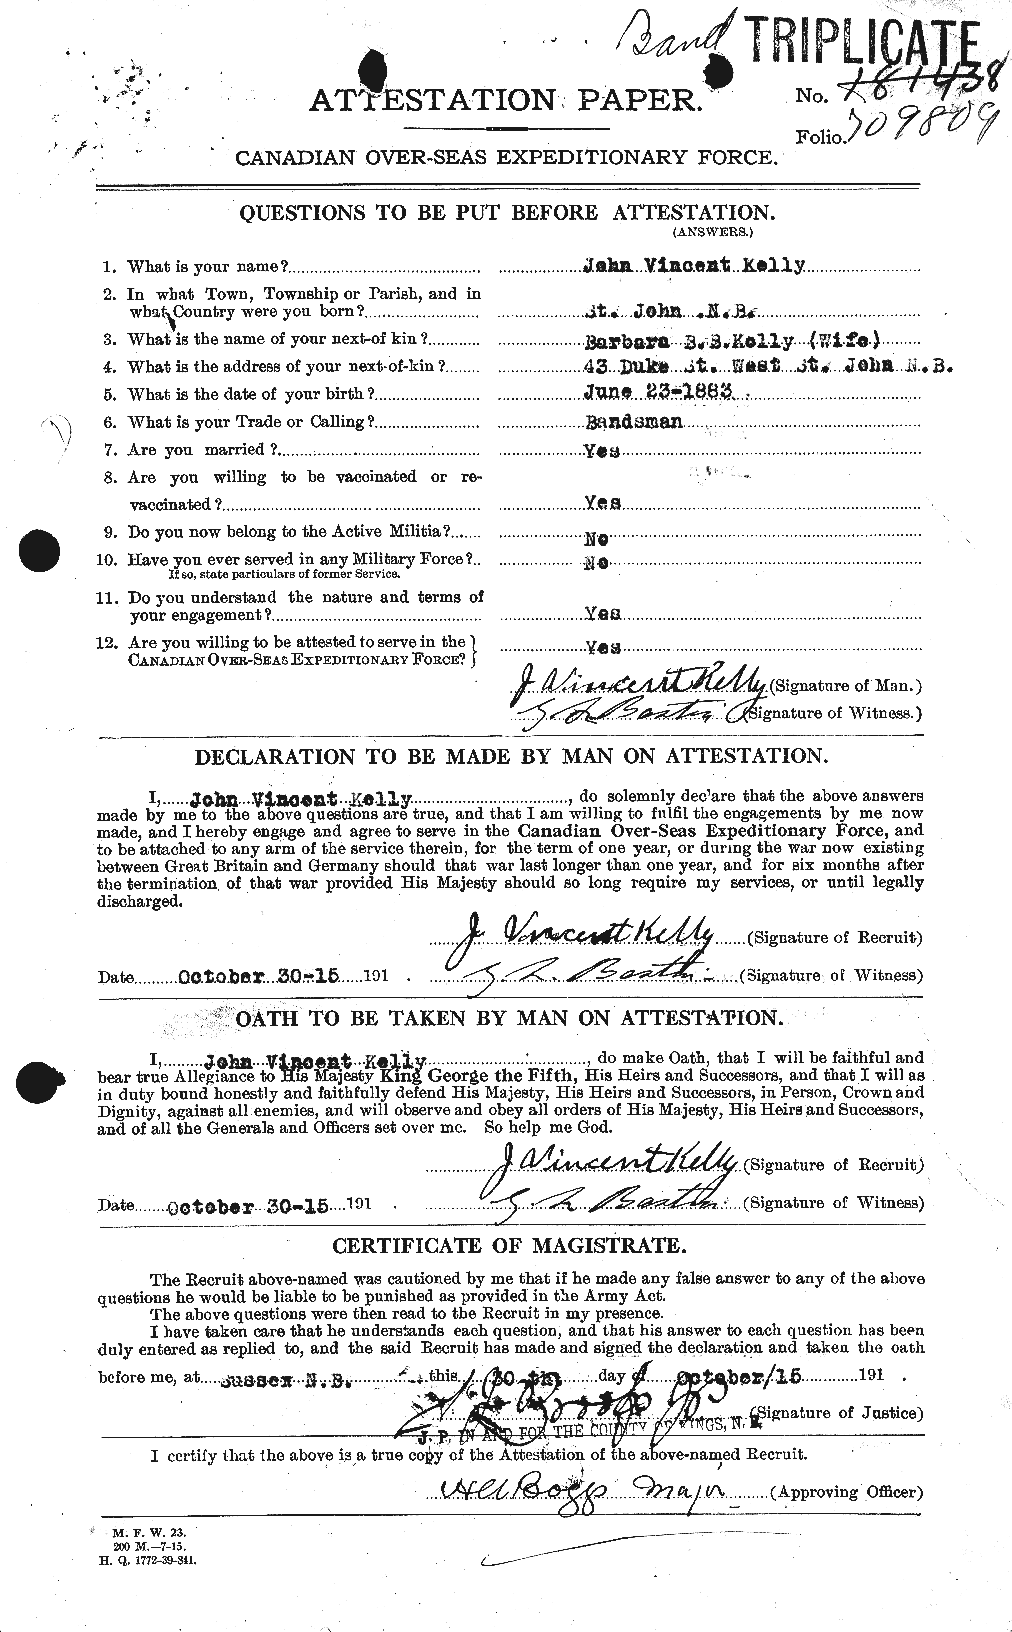 Personnel Records of the First World War - CEF 433586a